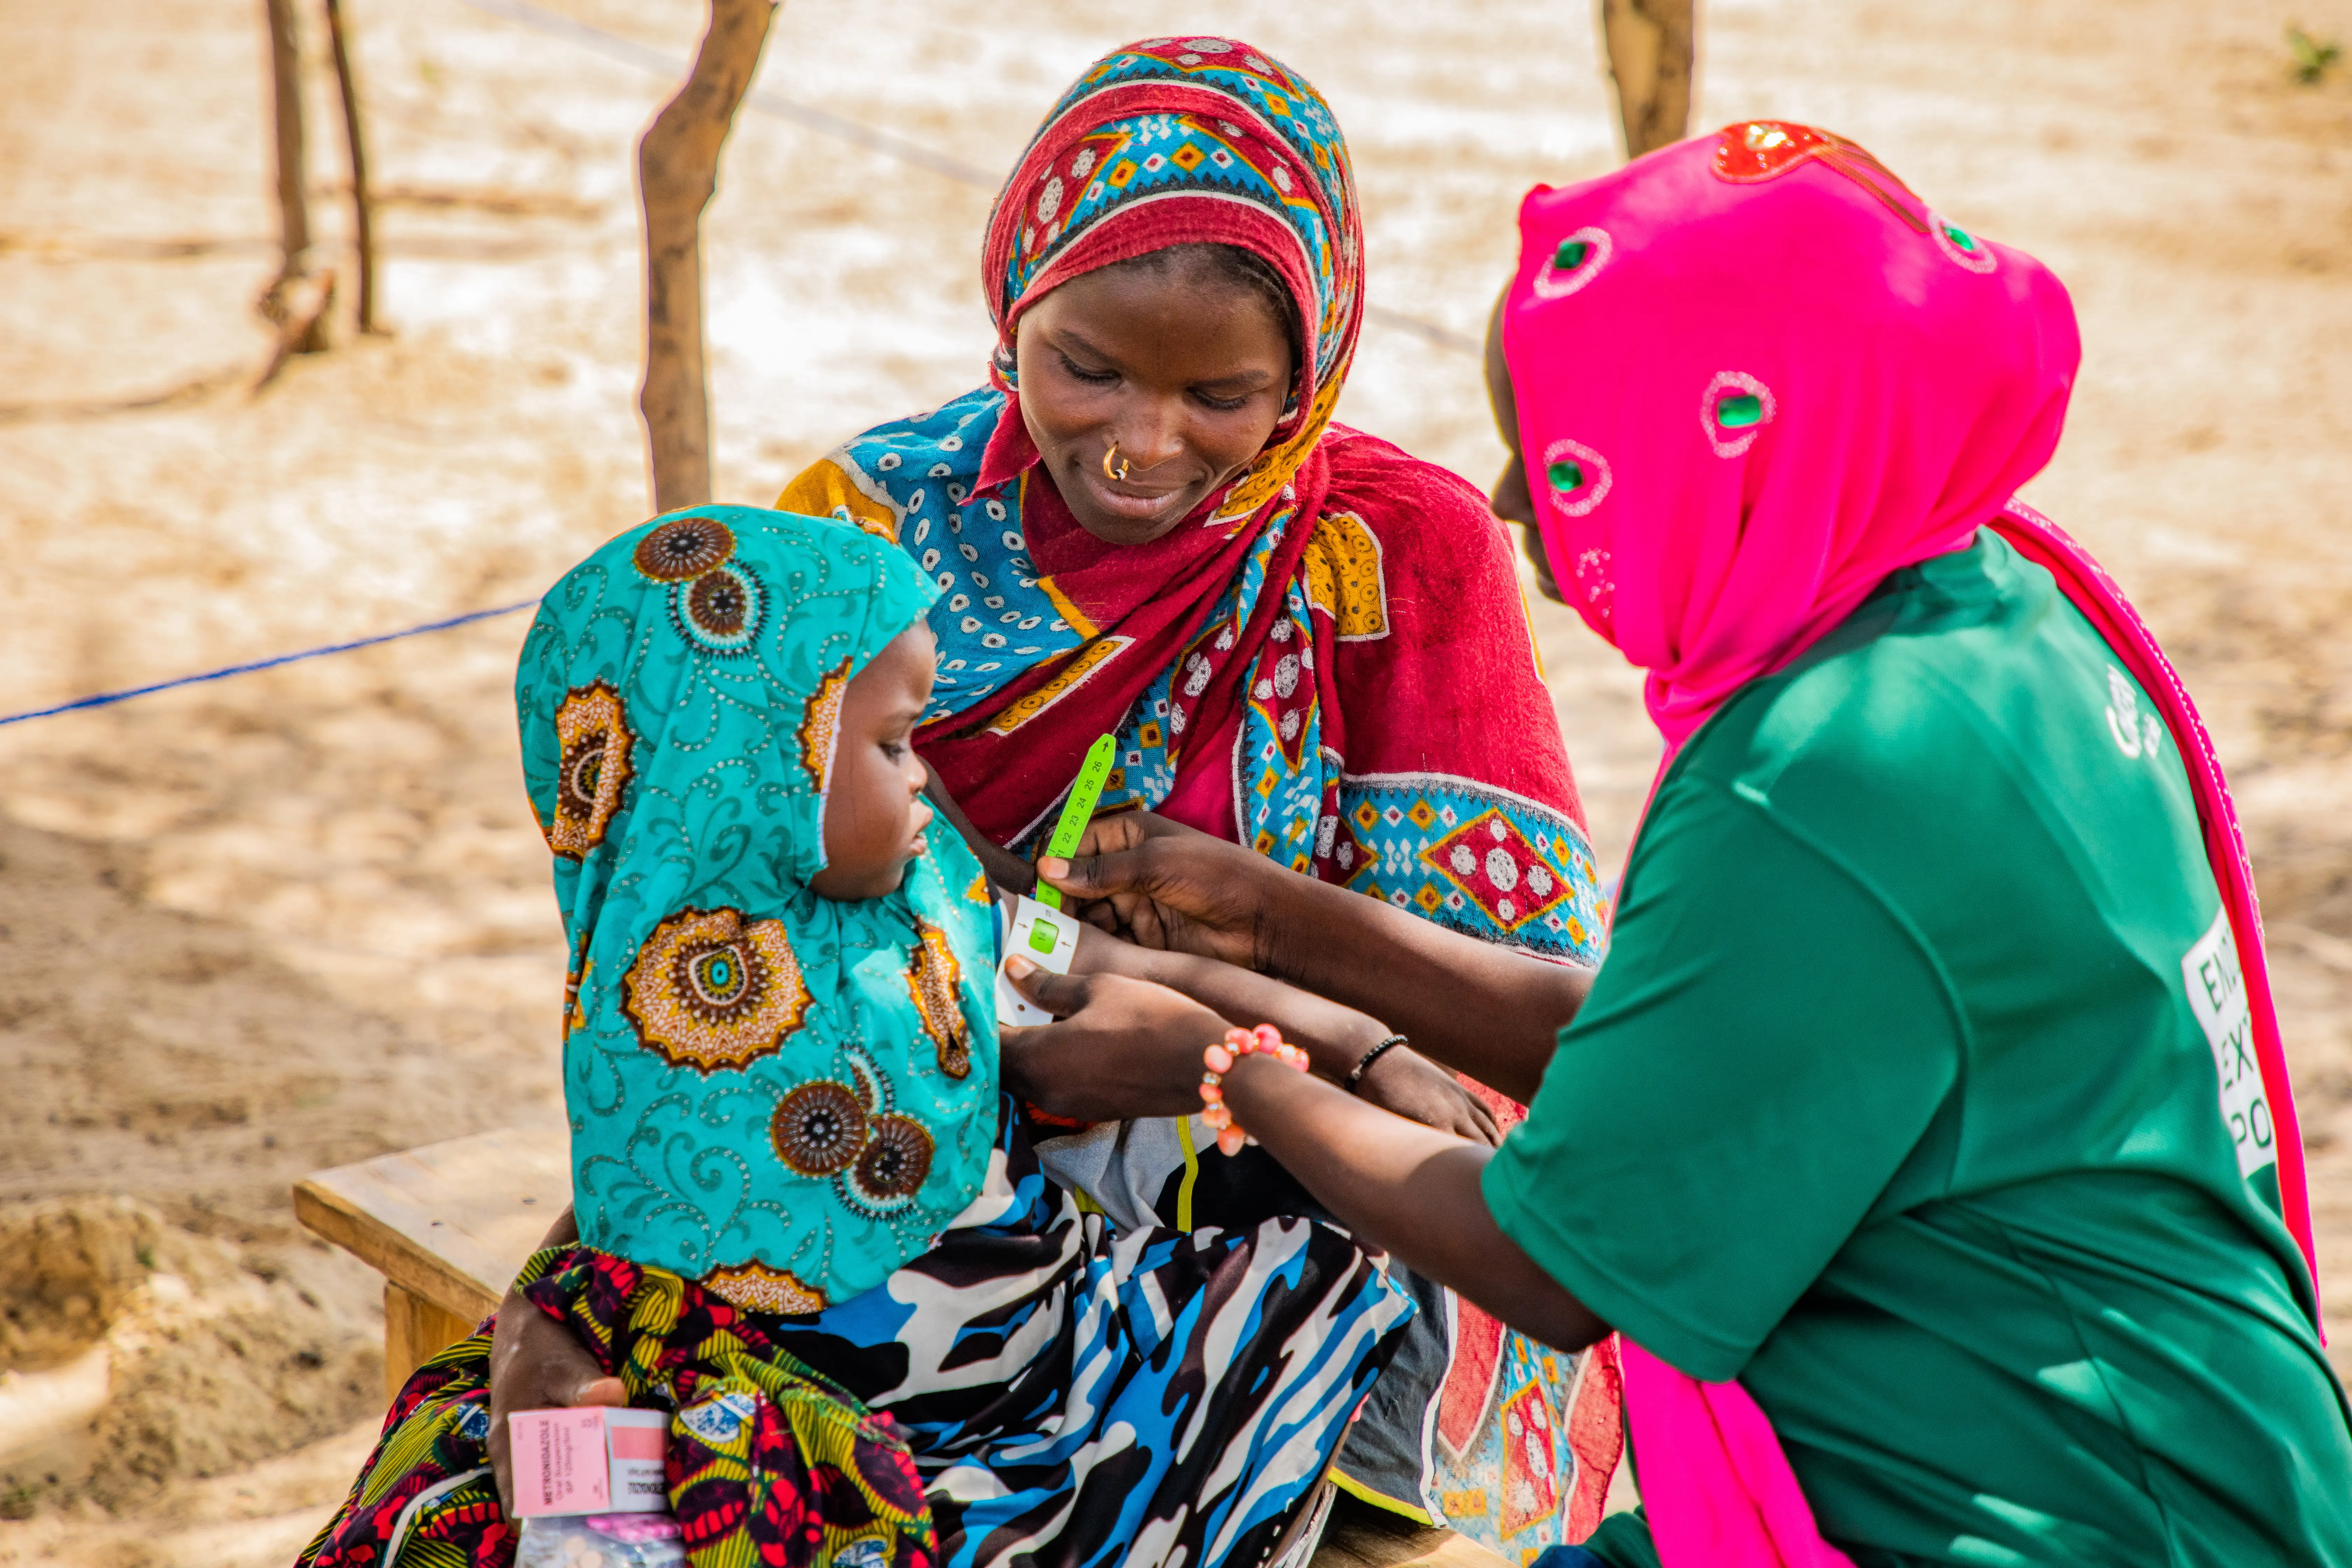 A Concern worker checks a young child for malnutrition in Chad